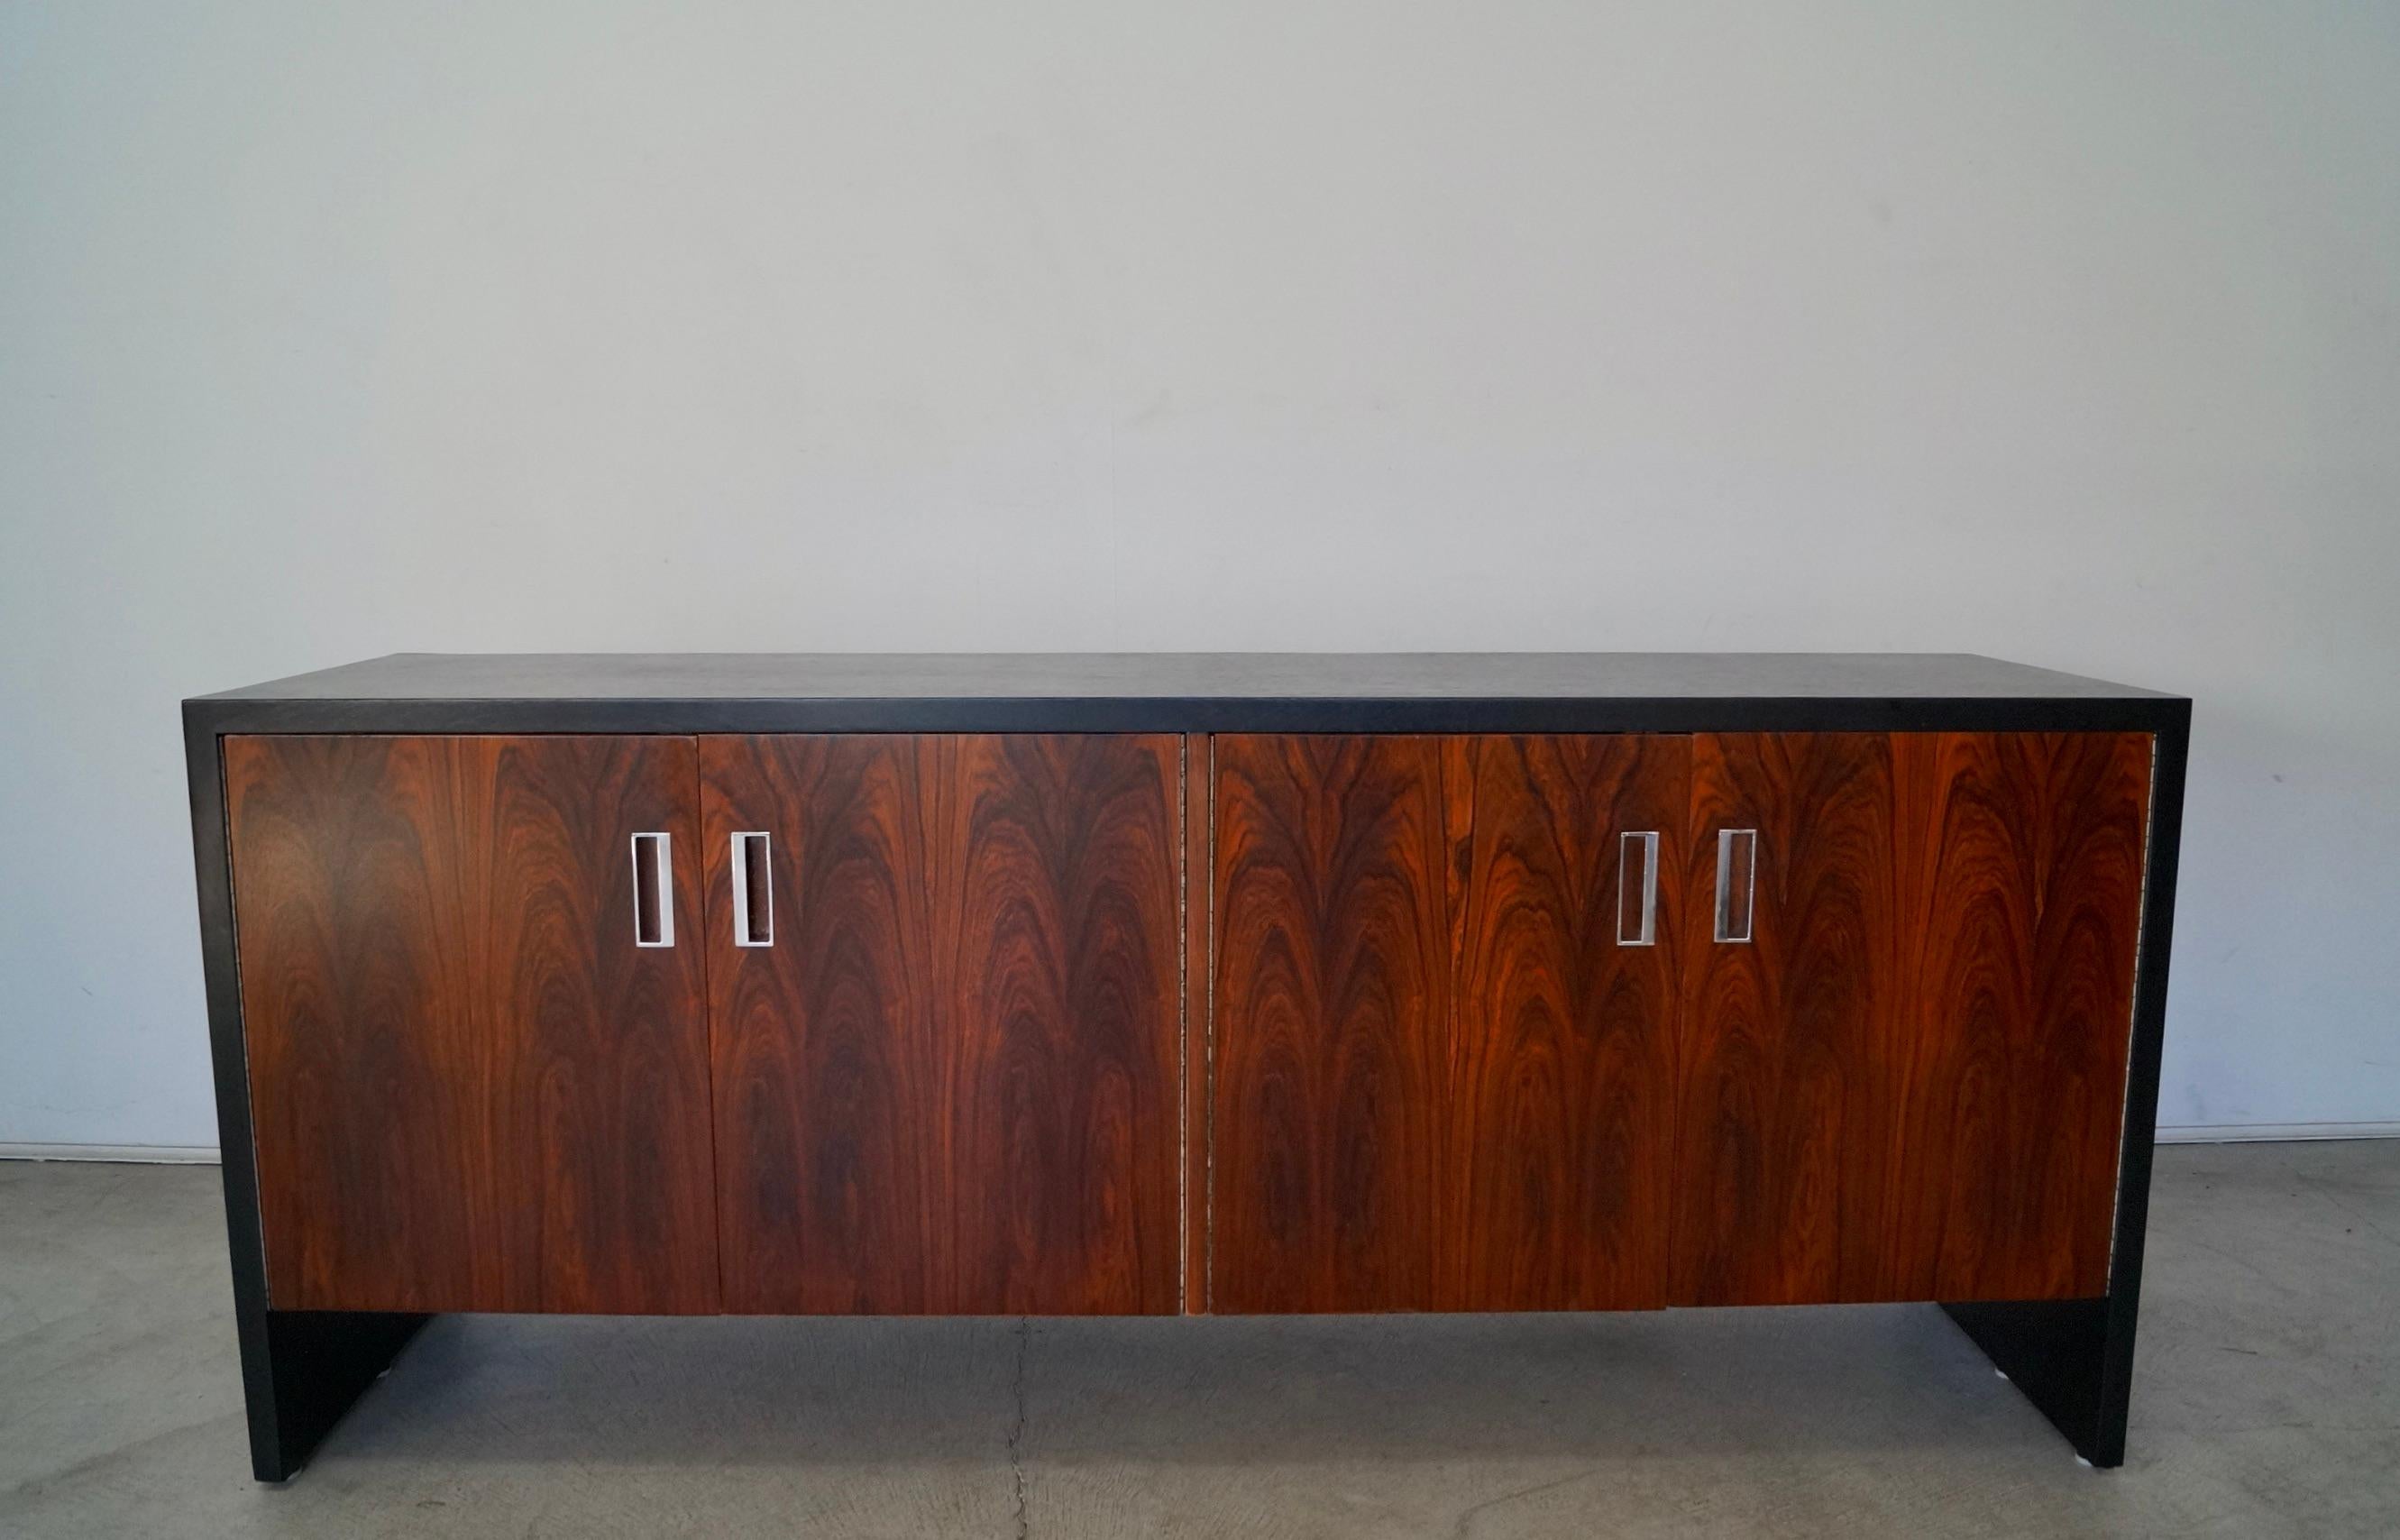 Original Mid-Century Modern sideboard for sale. Designed by Robert Baron for Glenn of California, and has been professionally refinished. It dates back to the 1970's, and has been beautifully restored. It has two cabinet doors in rosewood with